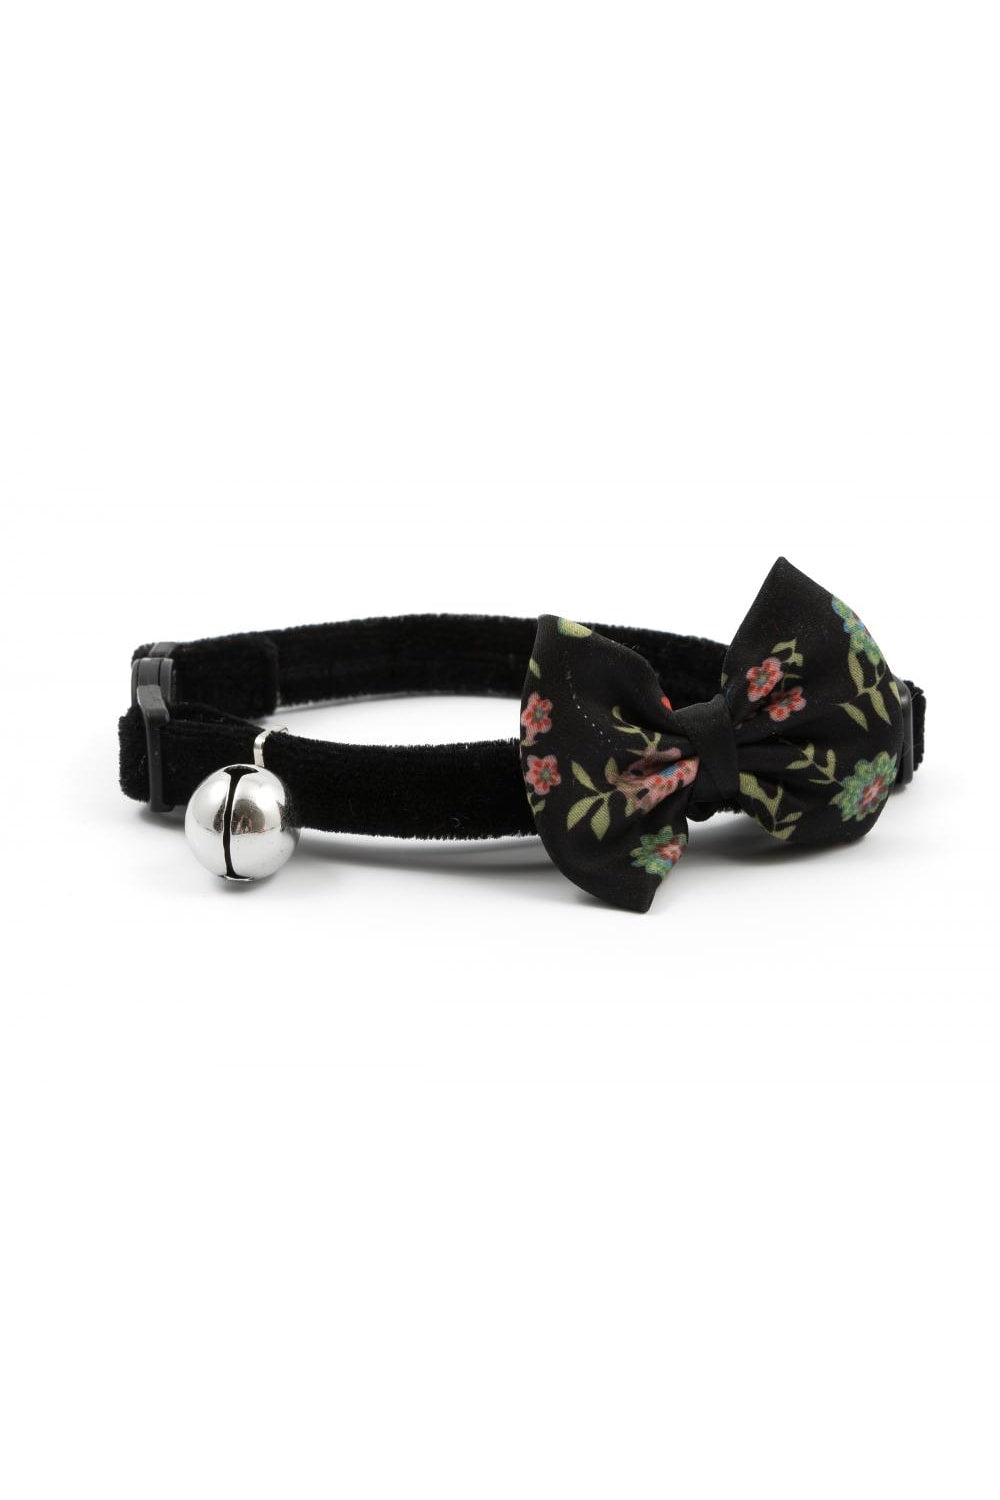 Ancol Vintage Bow Cat Collar (Black) (One Size)